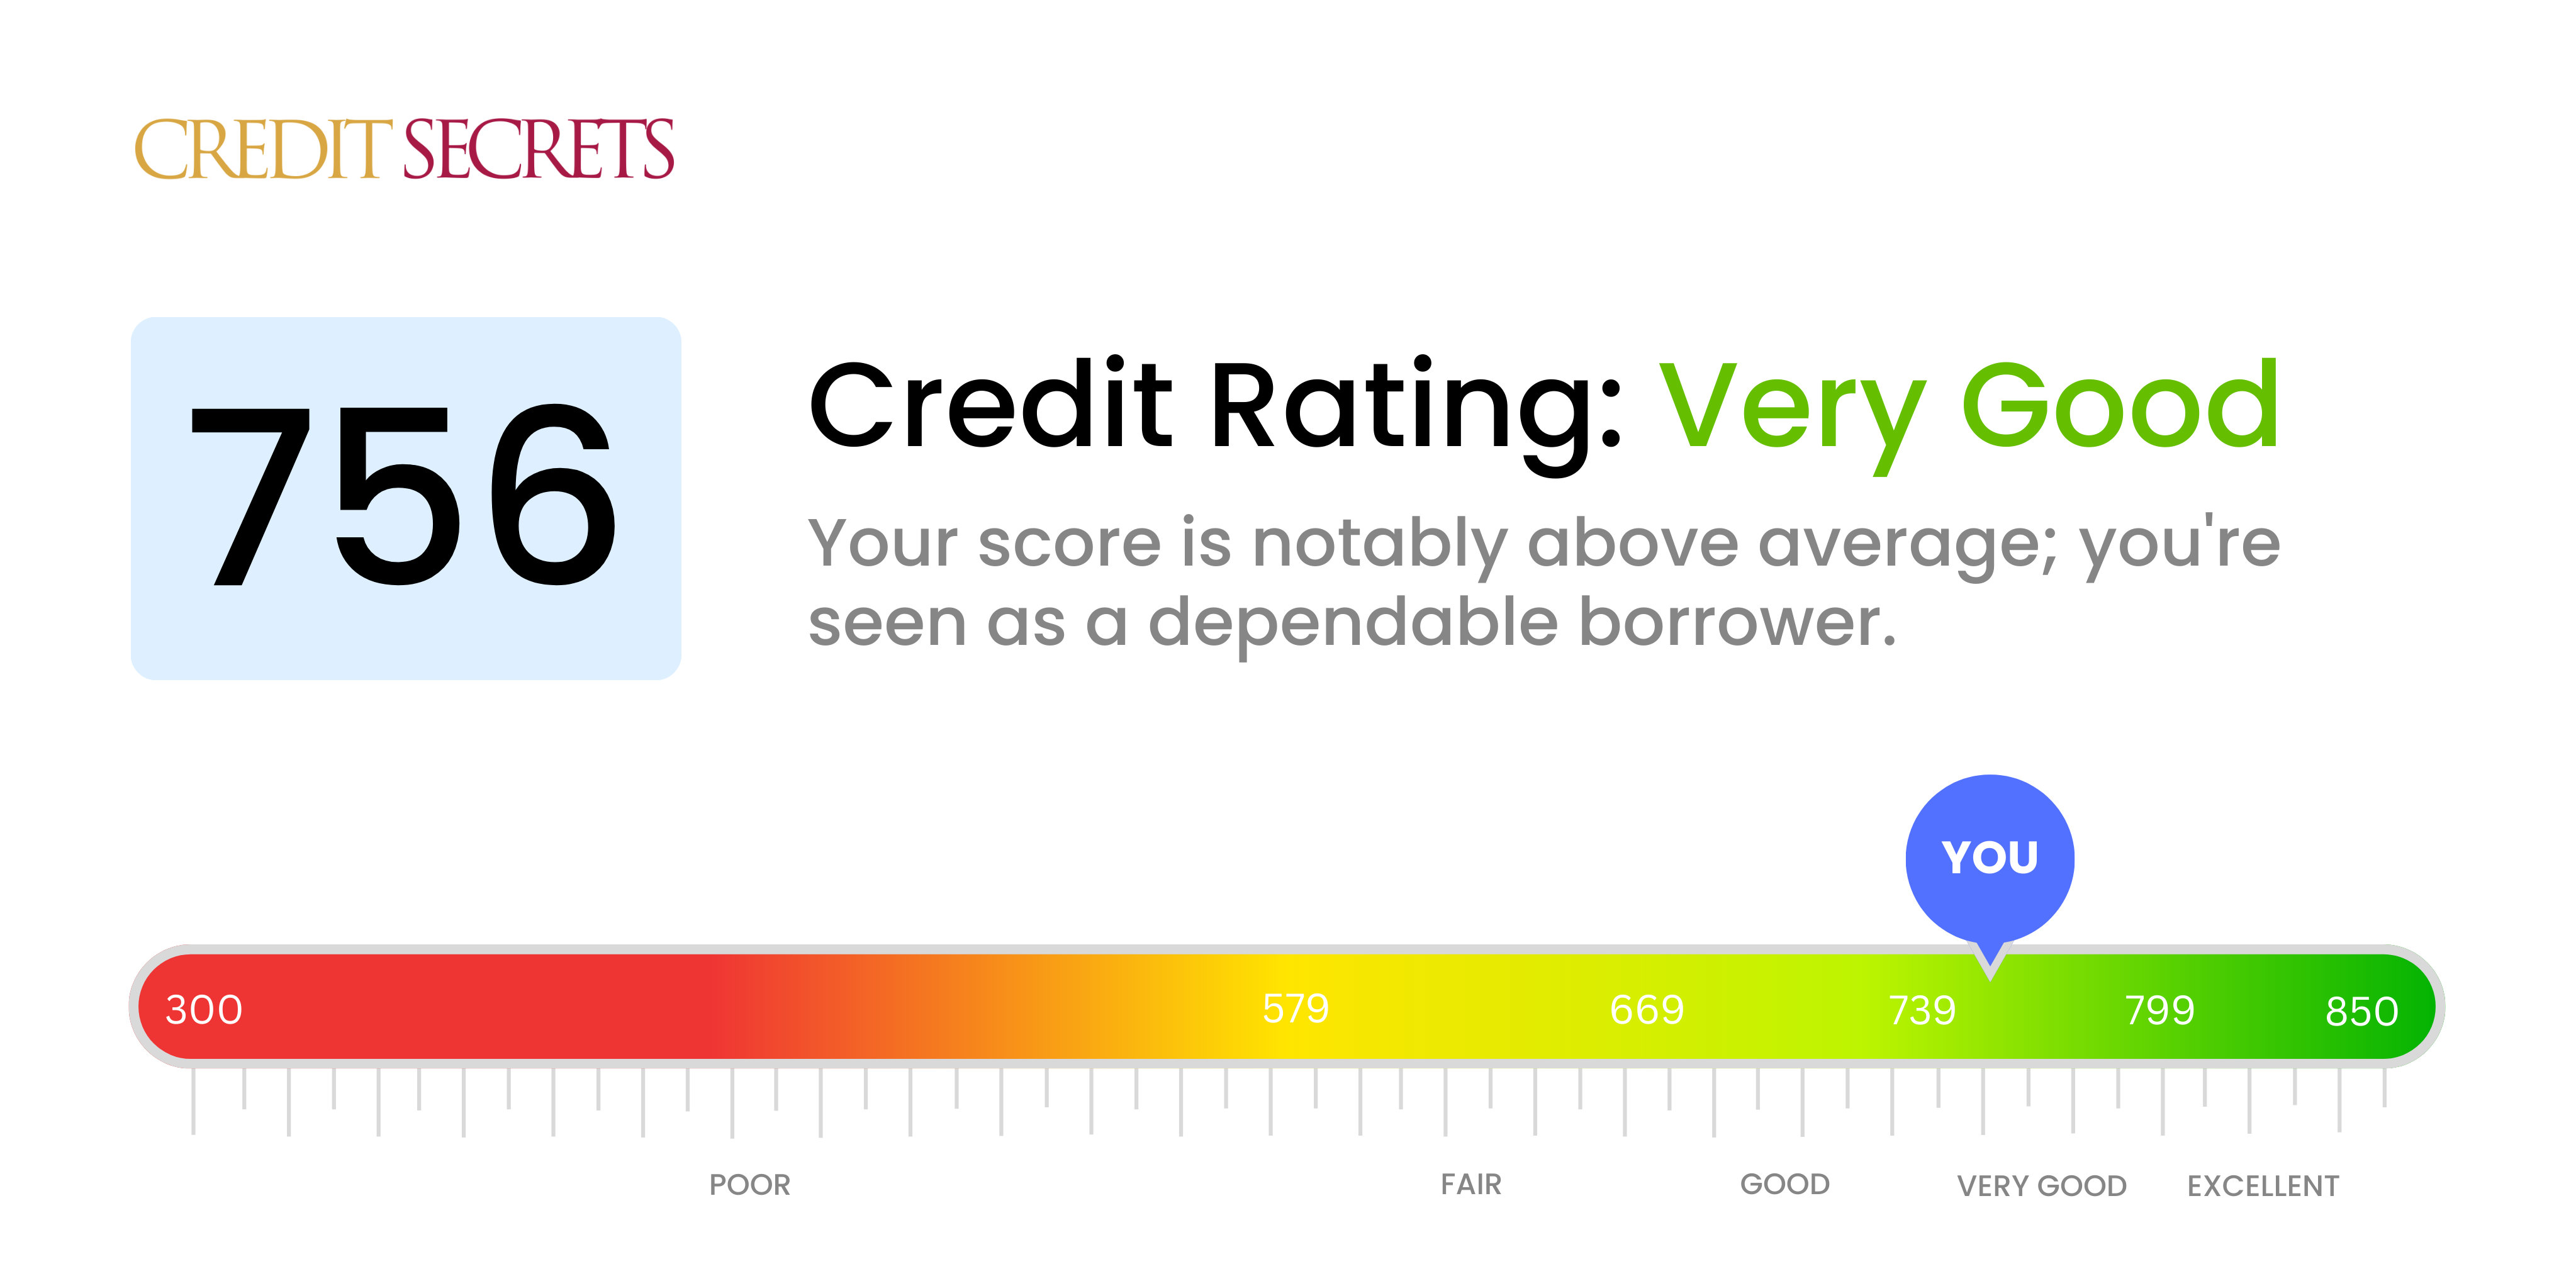 Is 756 a good credit score?